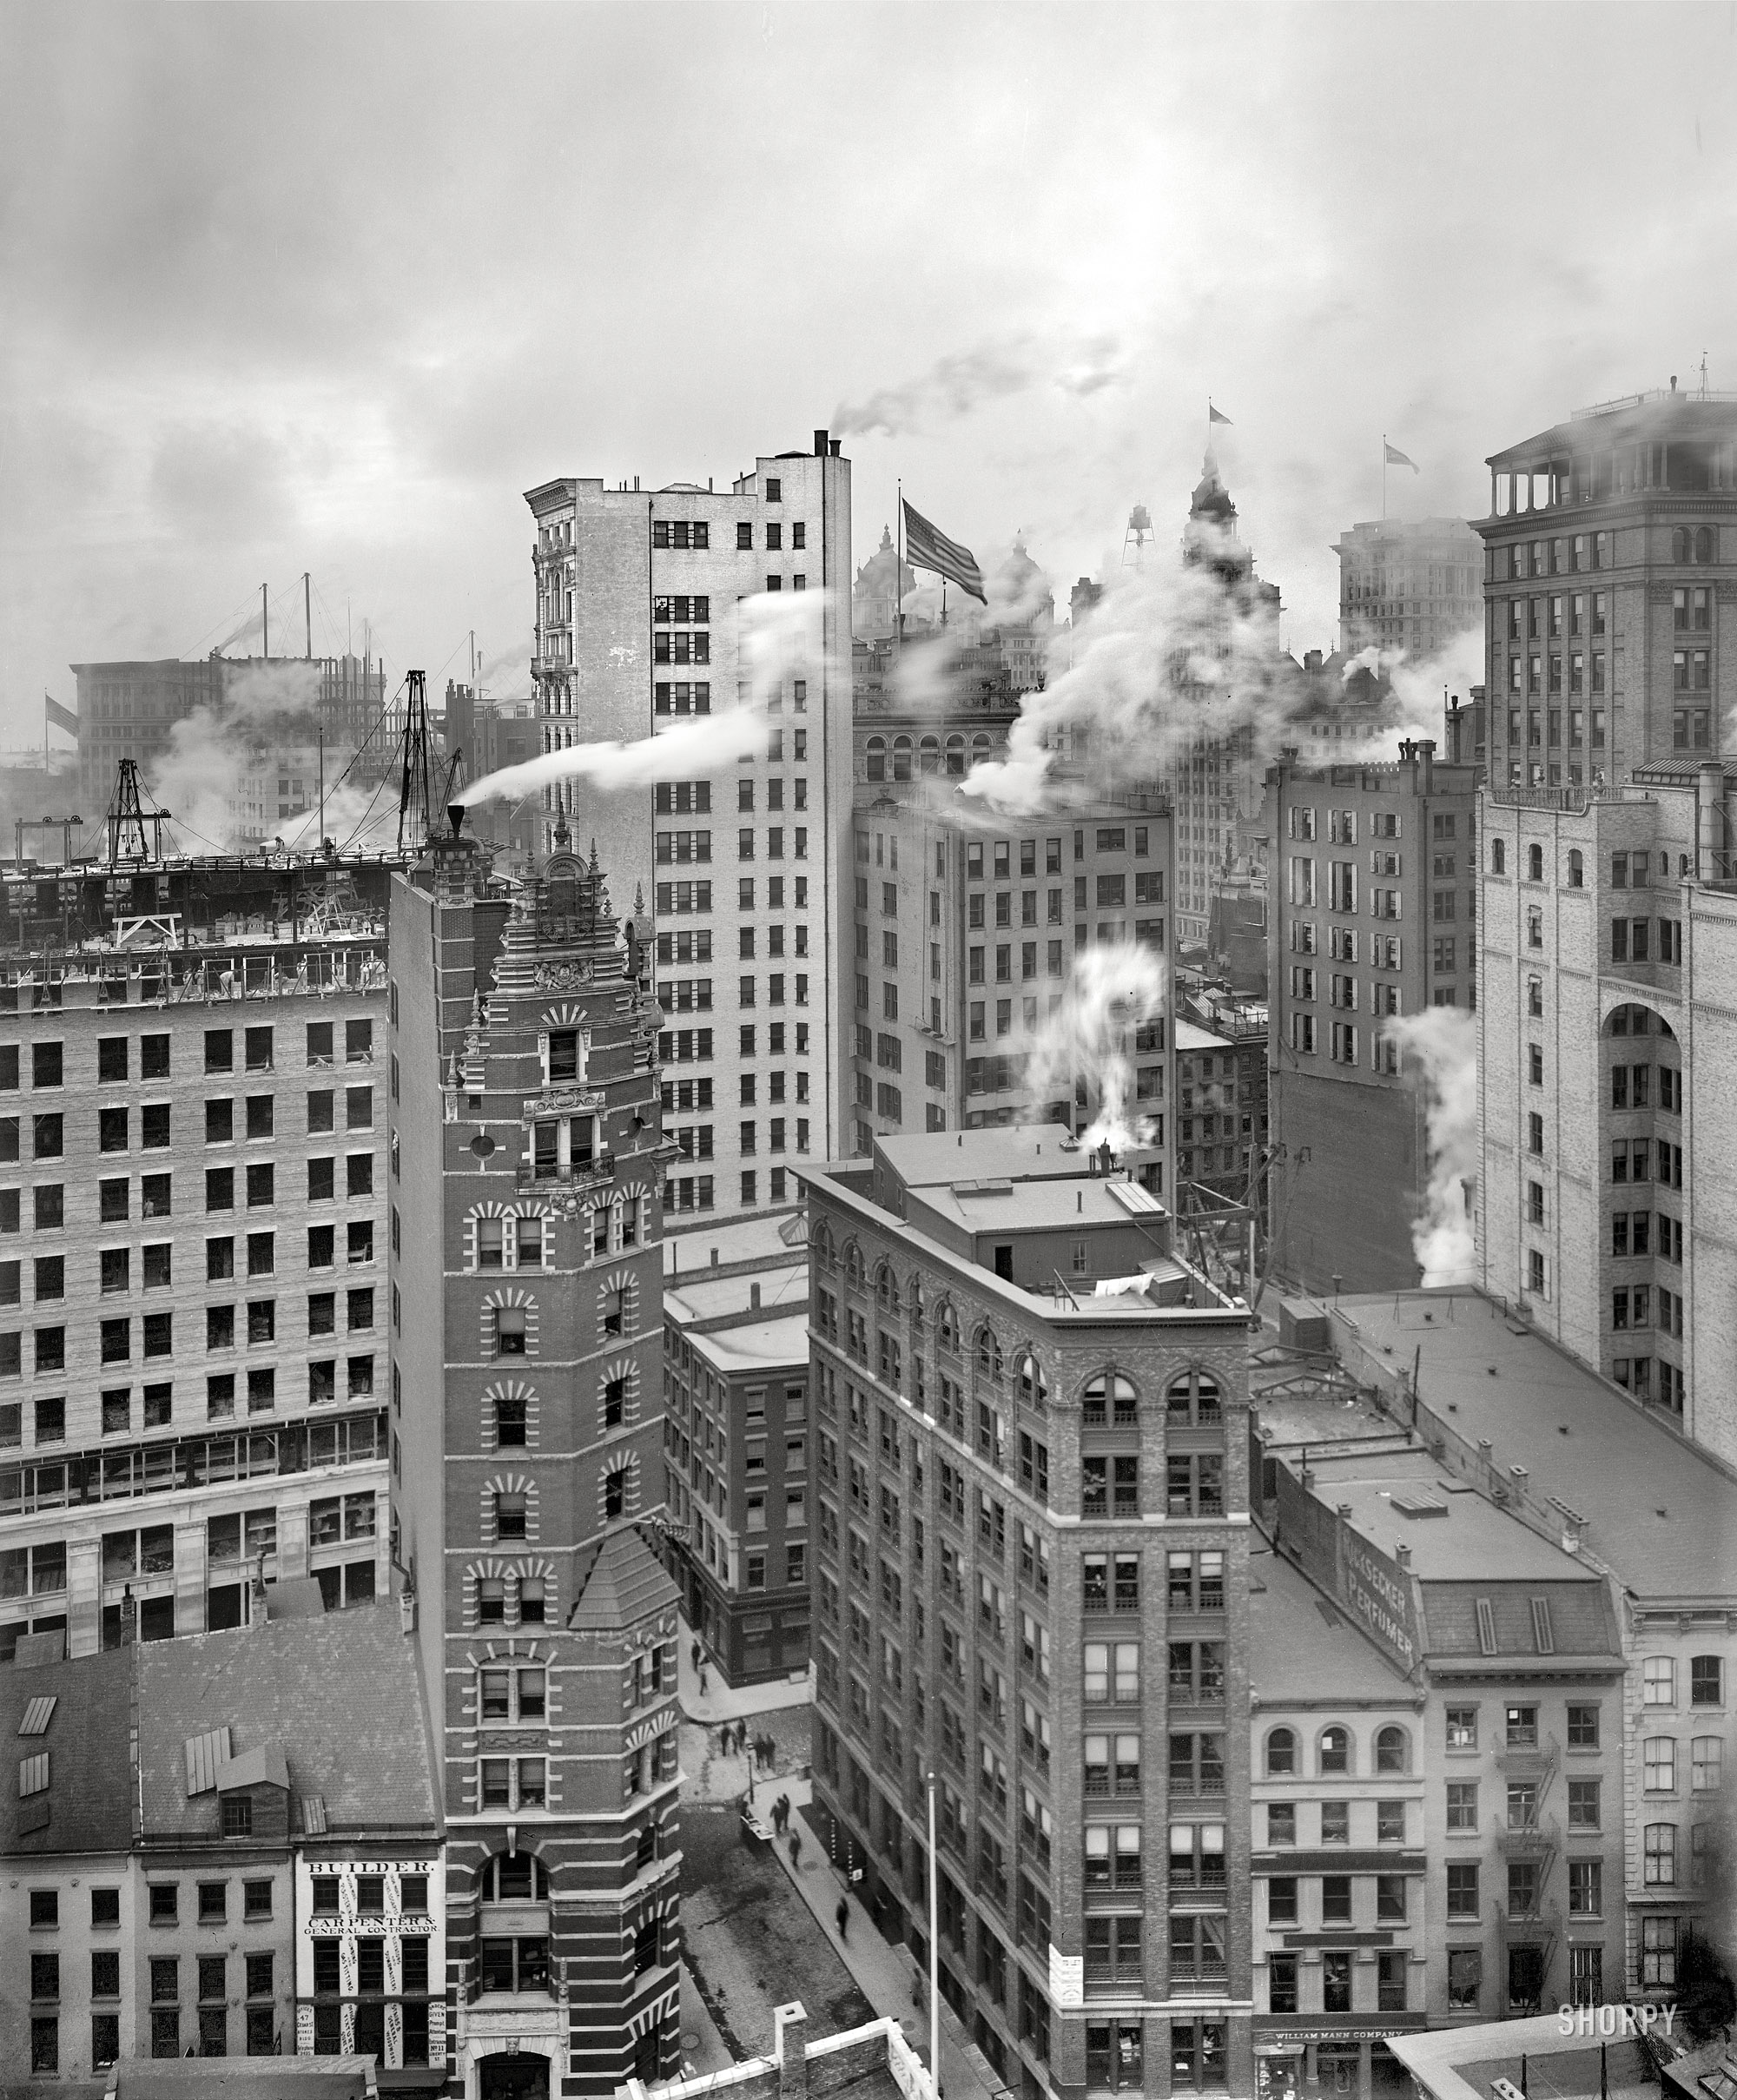 Circa 1901. "Cluster of skyscrapers, New York, New York." Who'll be first to name the street? 8x10 inch glass negative, Detroit Publishing Company. View full size.